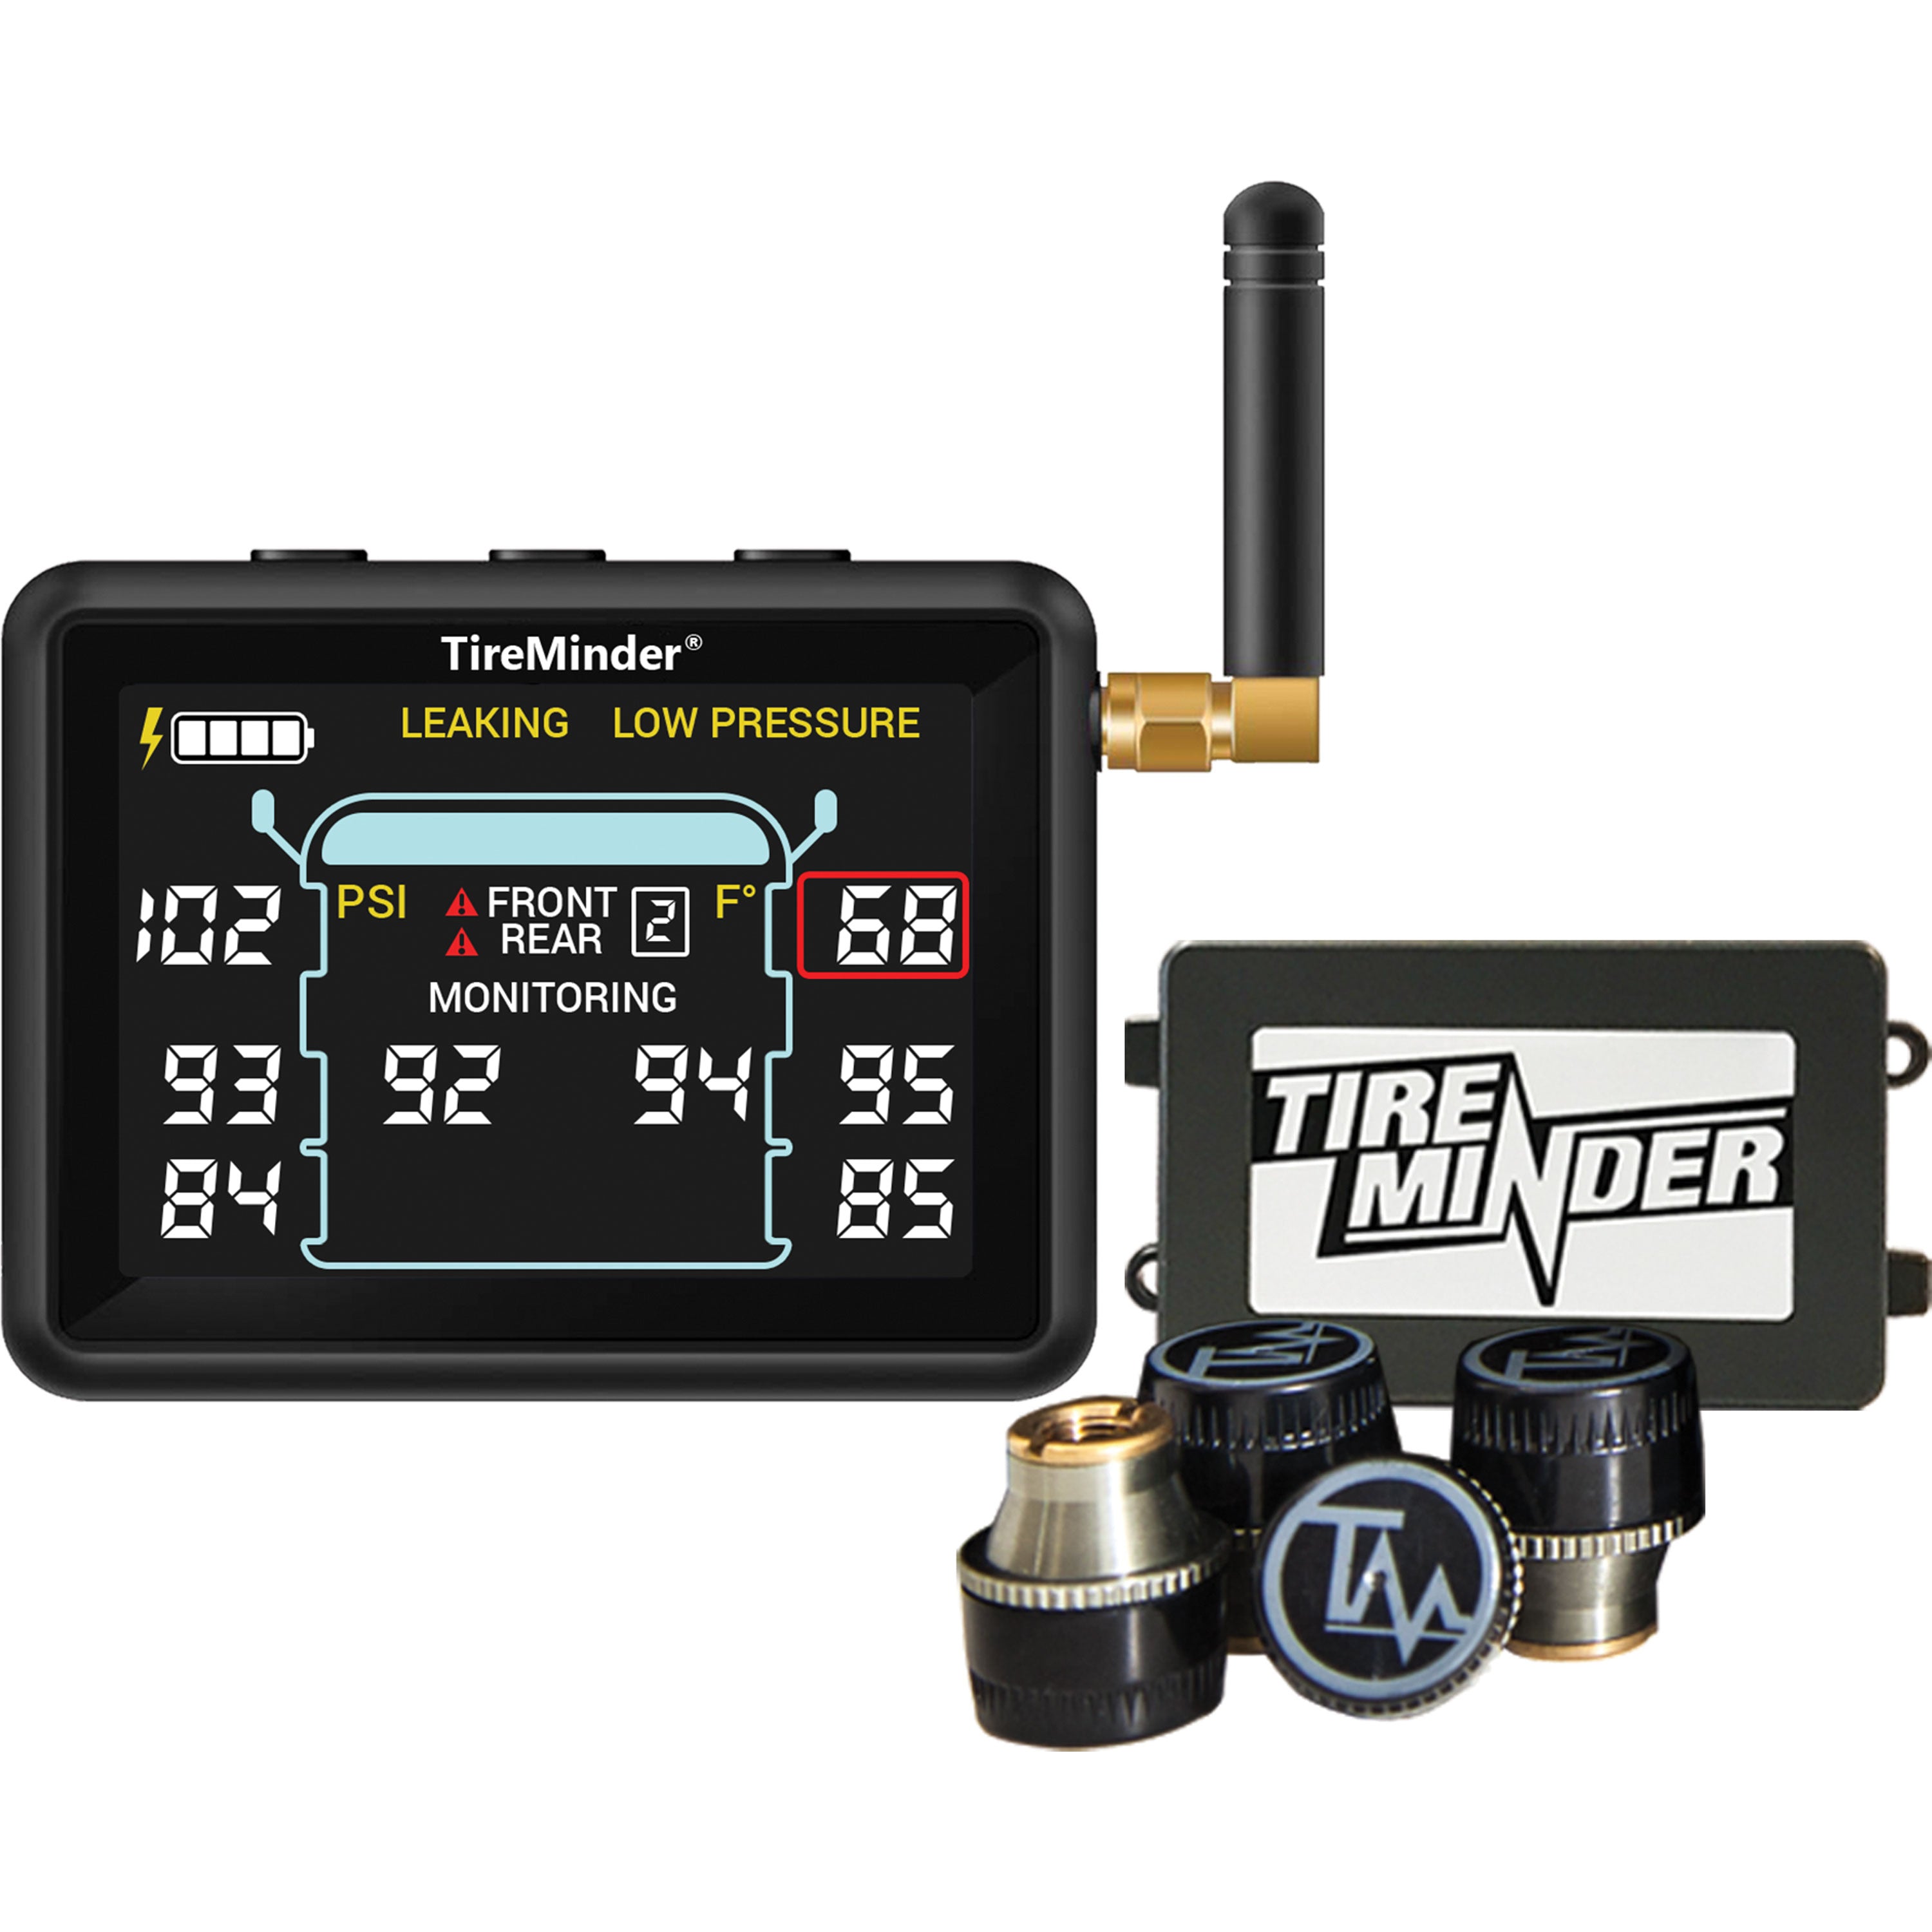 Minder Research TM22141 TireMinder i10 RV TPMS with 4 Transmitters